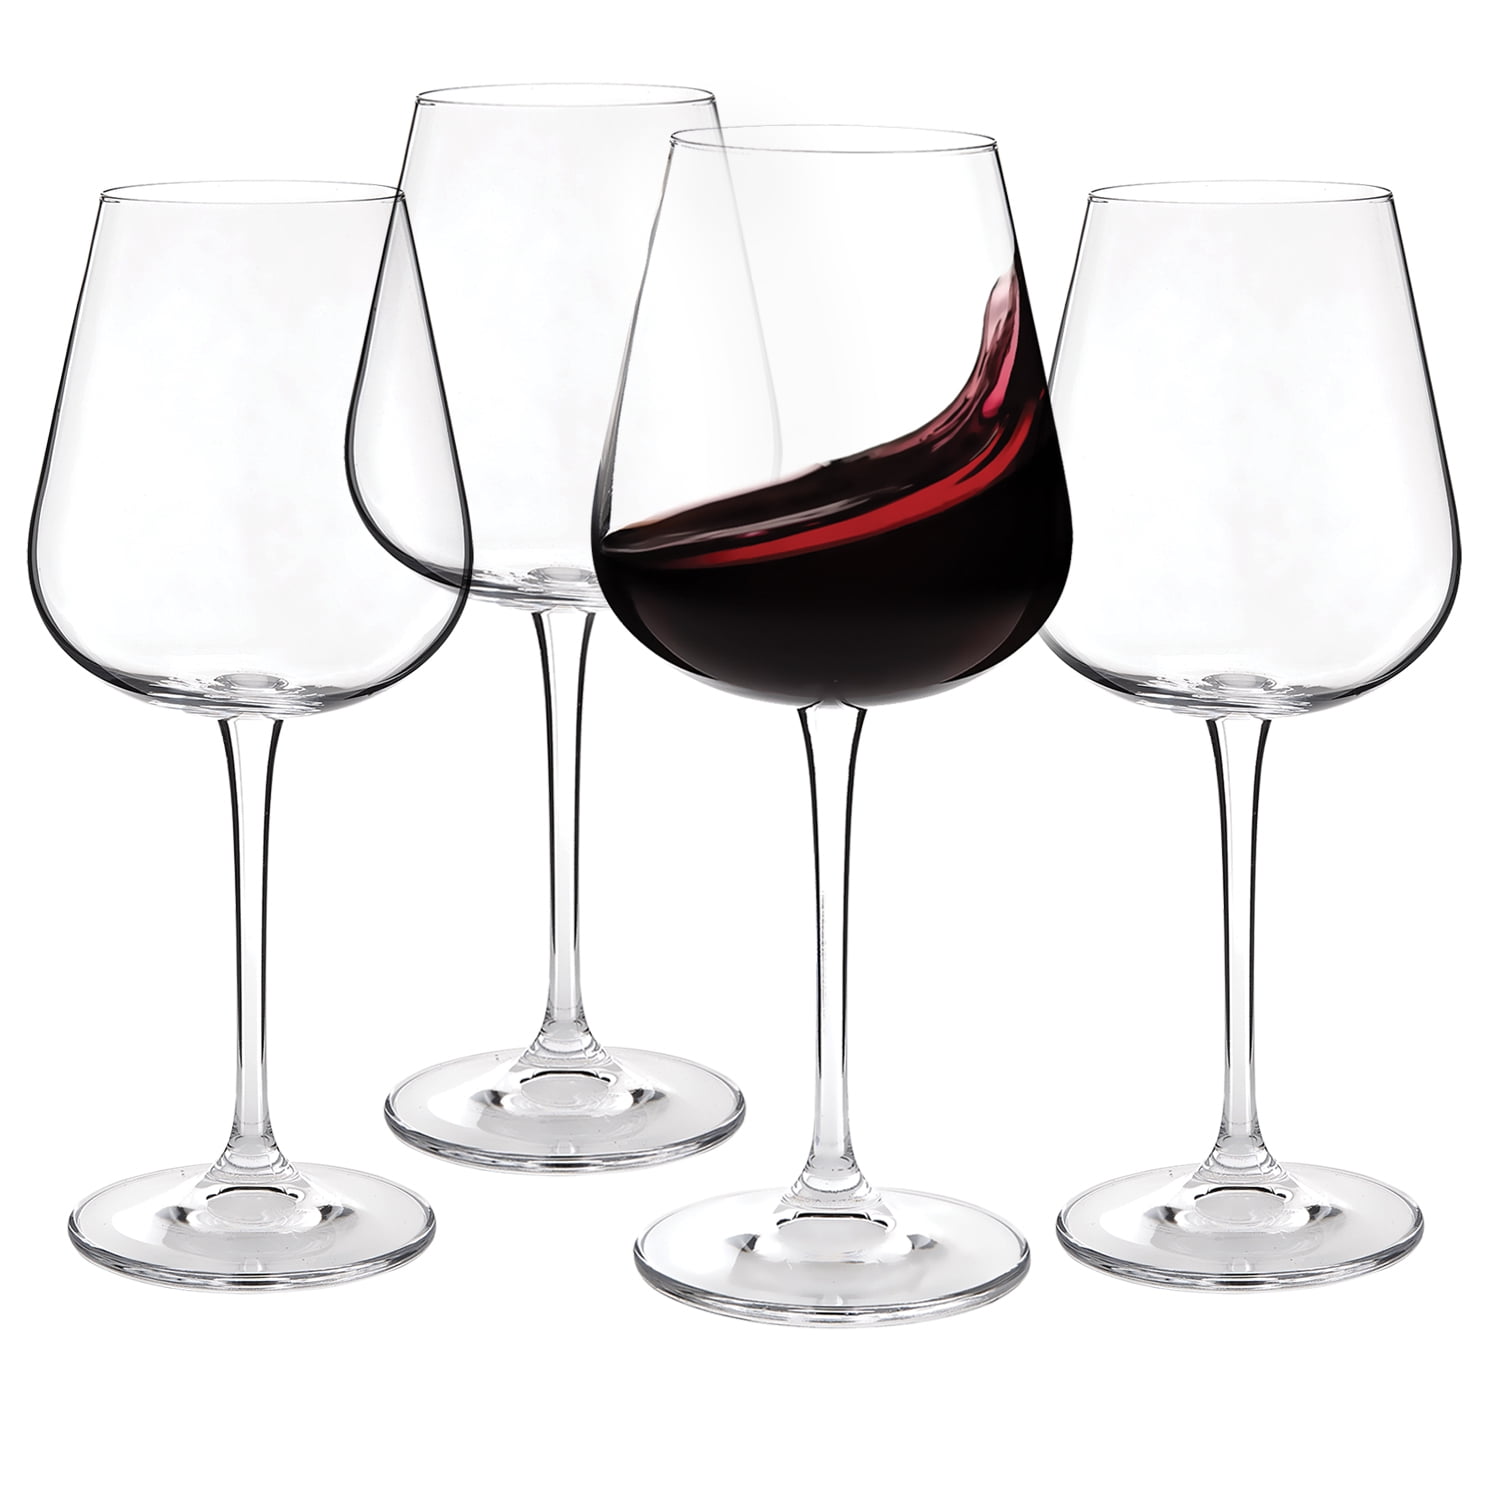 CZUMJJ Crystal Wine Glasses Set of 12, 12 Ounce Red